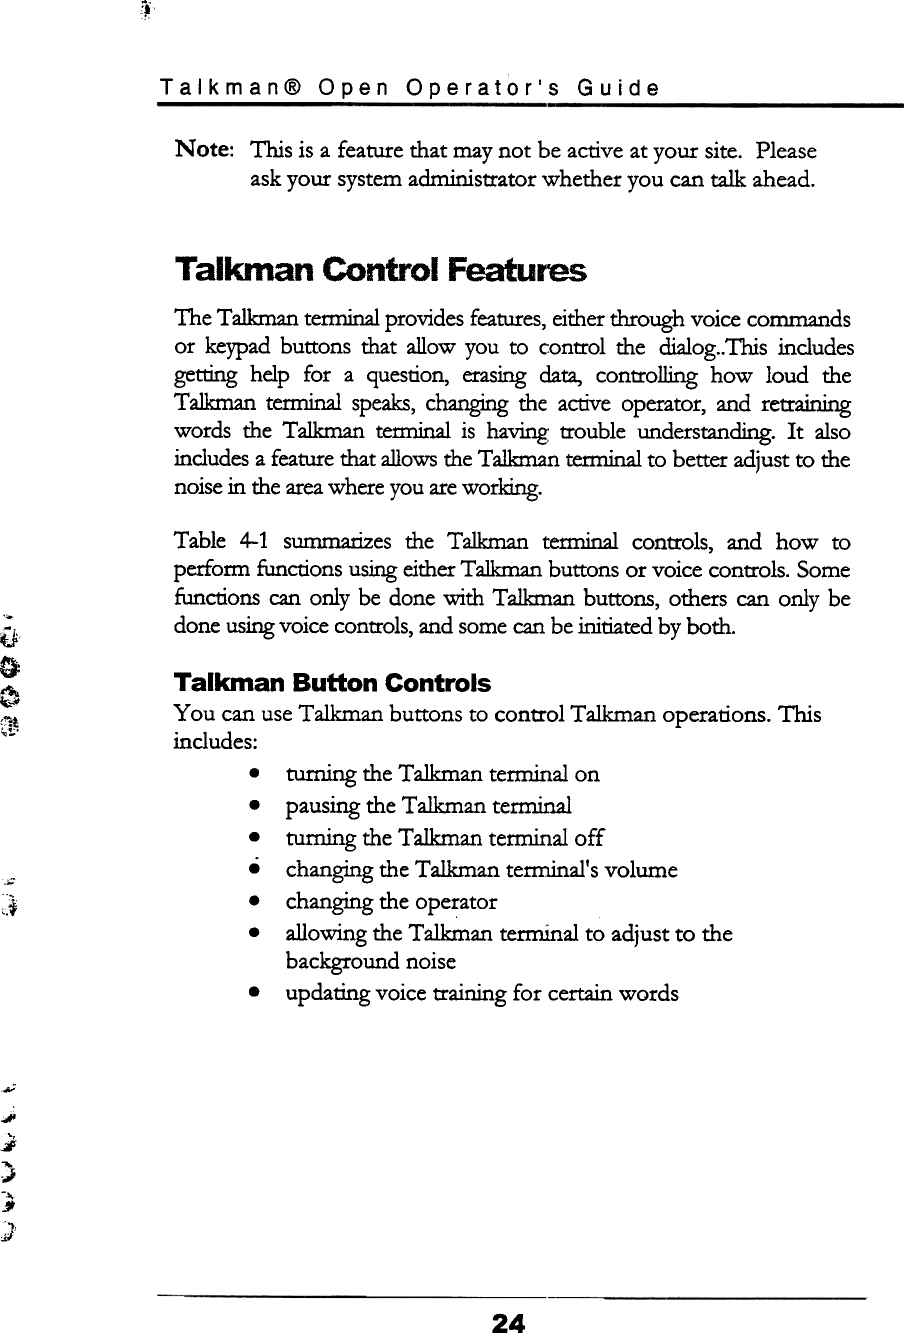 ~iTalkman@  Open  Operator&apos;s  GuideNote: This is a feature that may not  be active at your  site.  Pleaseask your  system administrator  whether  you  can talk  ahead.Talkman  Control  FeaturesThe Ta1kman terminal provides features, either through voice commandsor  keypad buttons  that  allow  you  to  control  the  dialog.. This  includesgetting  help  for  a  question,  erasing data,  controlling  how  loud  theTalkman  tenninal  speaks, changing the  active operator,  and  retrainingwords  the  Talkman  temlinal  is  having  trouble  understanding.  It  alsoincludes a feature that allows the Talkman tem1inal to better adjust to thenoise in the area where you are working.Table  4-1  summarizes  the  Talkman  terminal  controls,  and  how  toperform  functions using either Talkman buttons  or voice controls.  Somefunctions  can only  be done -with Talkman  buttons,  others  can only  bedone using voice controls, and some can be initiated by both.iJ;0~~Talkman  Button  ControlsYou  can use Talkman  buttons  to control  Talkman  operations.  Thisincludes:.turning  the Talkman  ternllnal  onpausing the Talkman  tem1inalturning  the Talkman  ternllnal  offchanging the Talkman  tem1inal&apos;s volumechanging the operatorallowing  the Talkman  terminal  to adjust to  thebackground  noiseupdating  voice training  for  certain words.....~,:~.JI;J,..}-..§..,j;/24